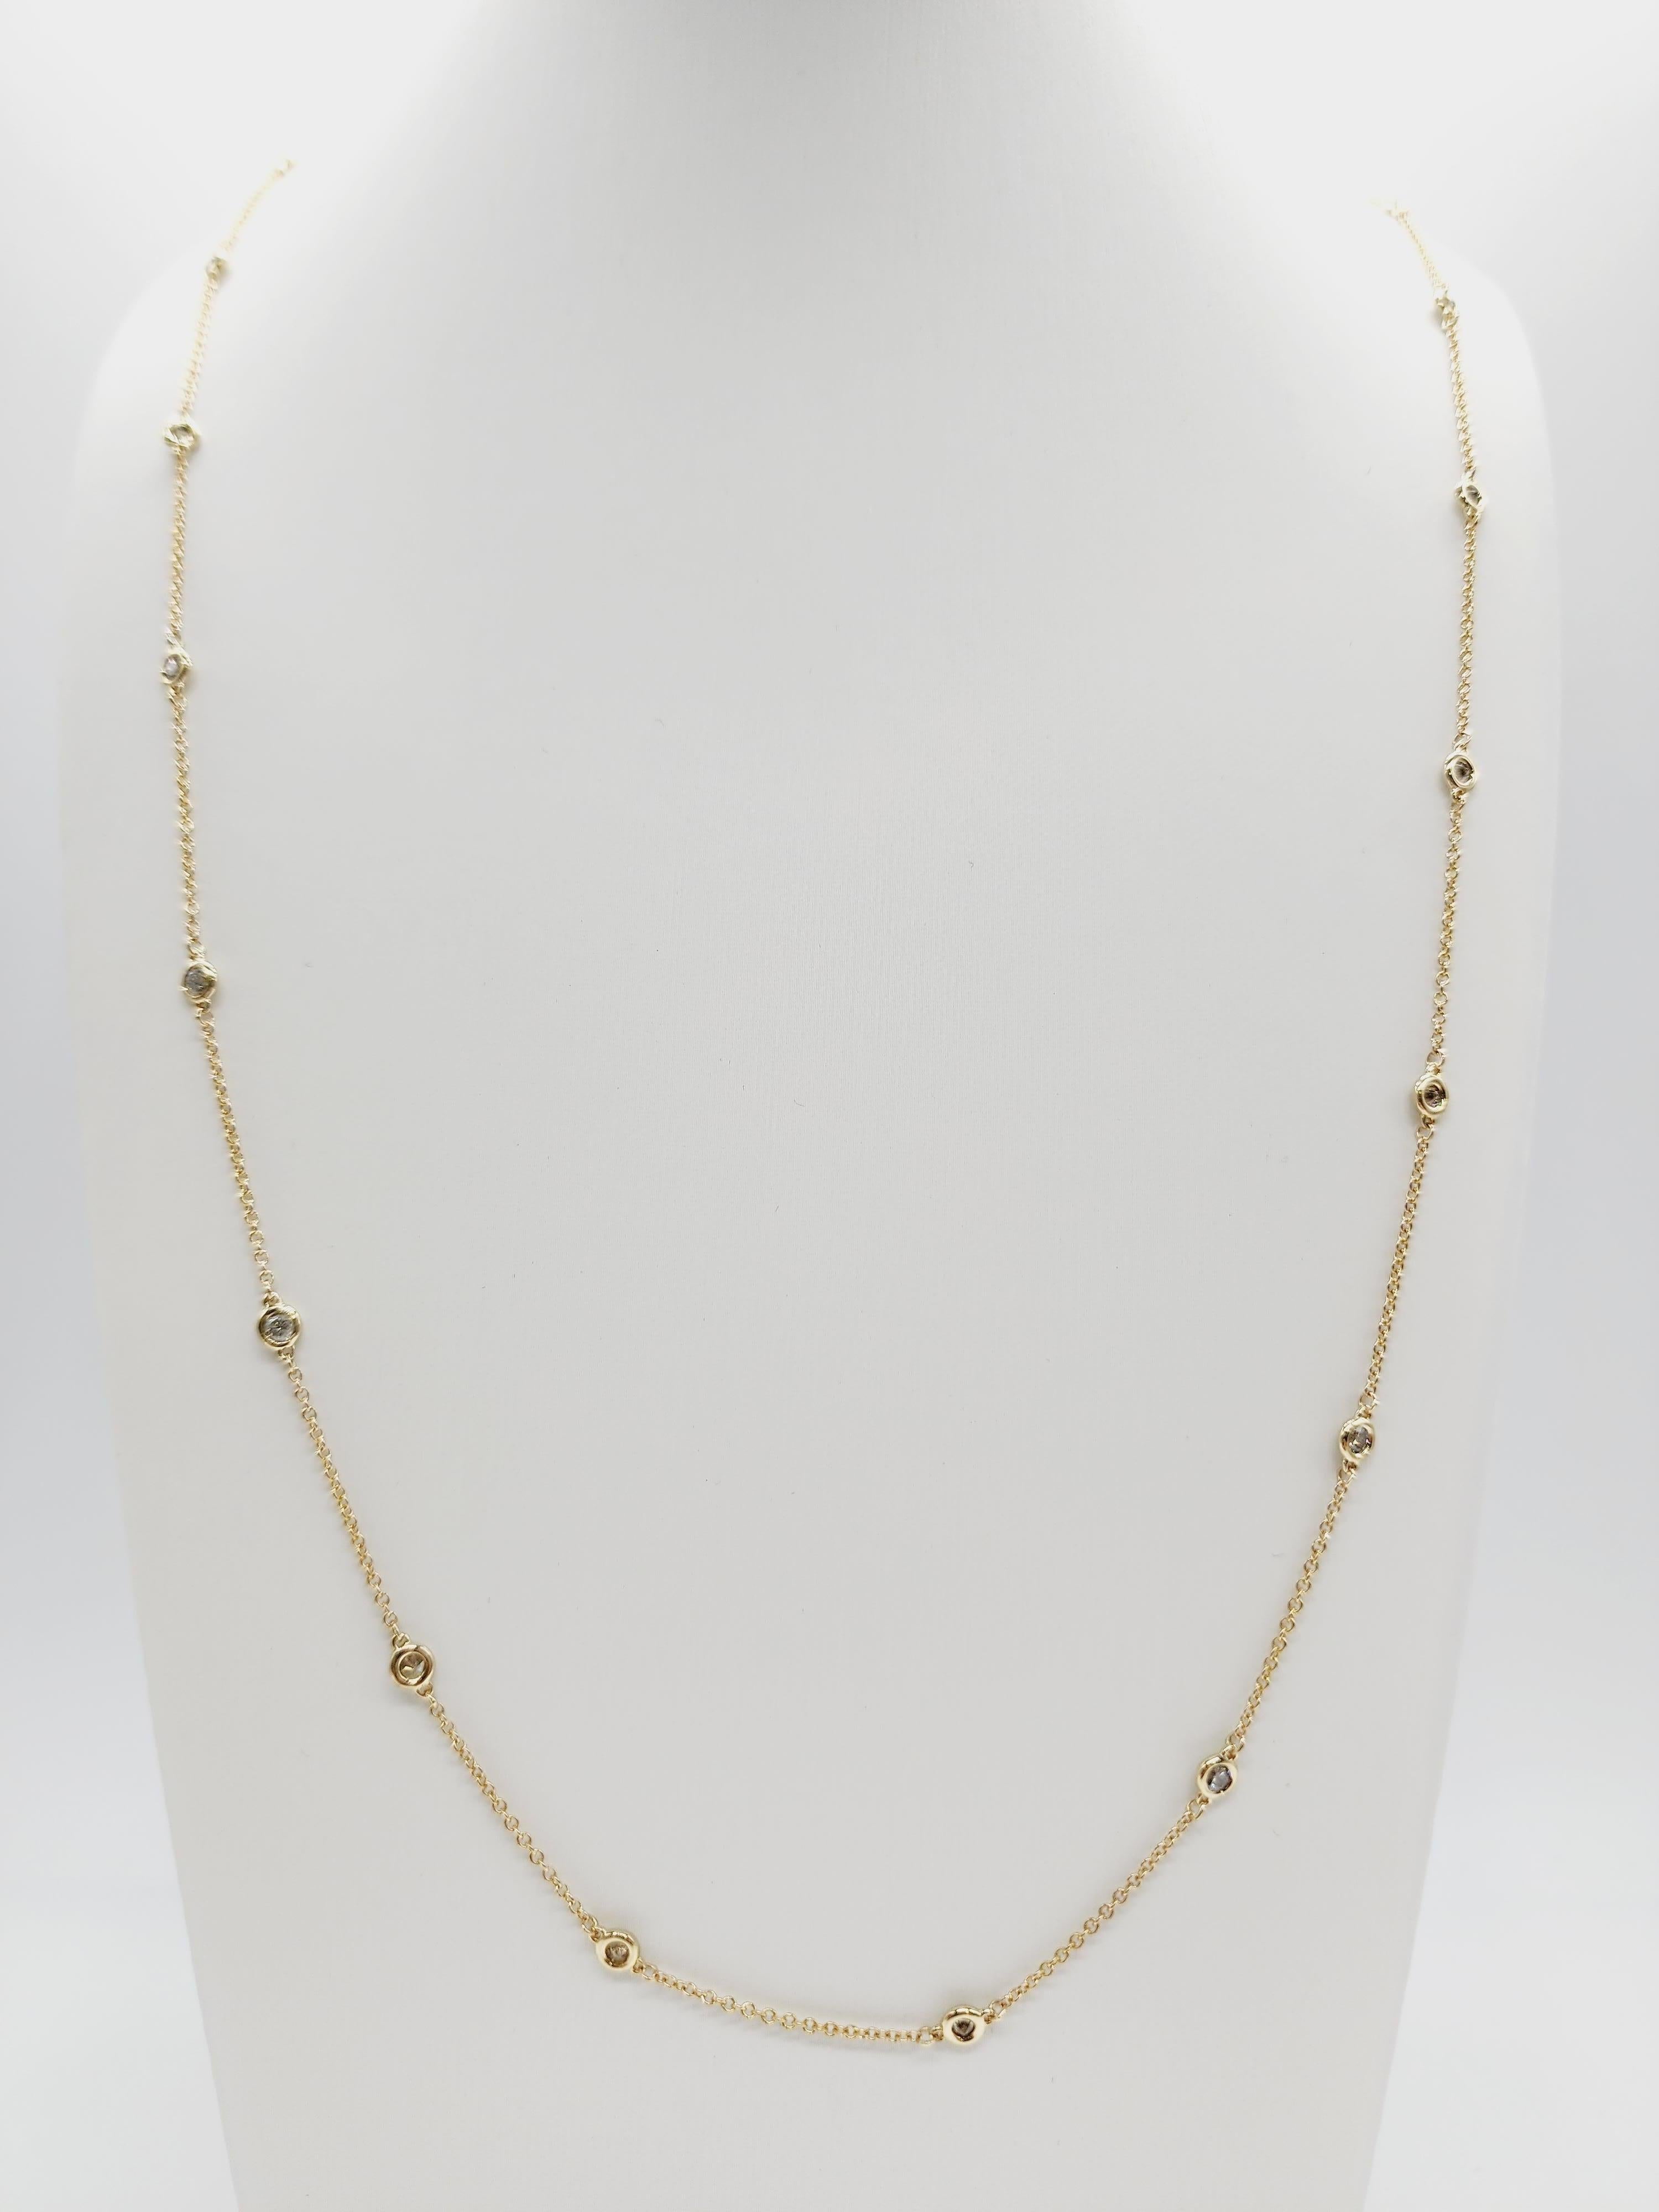 27 Stations Diamond by the yard necklace set in Italian made 14K yellow gold. The total weight is 1.50 carats. Beautiful shiny stones. The total length is 32 inch. Average I-SI.